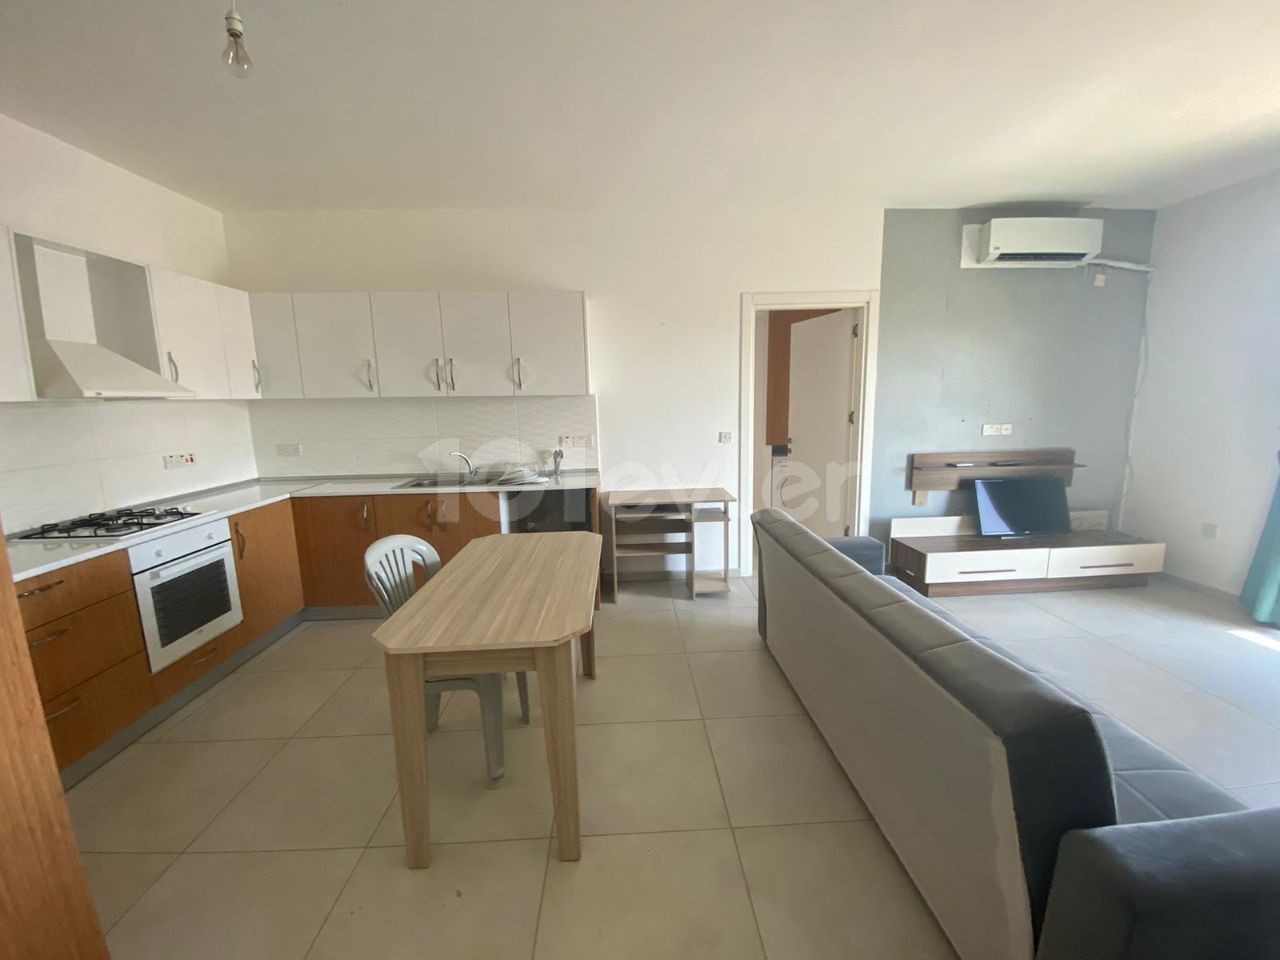 2 + 1 Furnished Apartment for Rent in Hamitkoy 5,000TL ** 